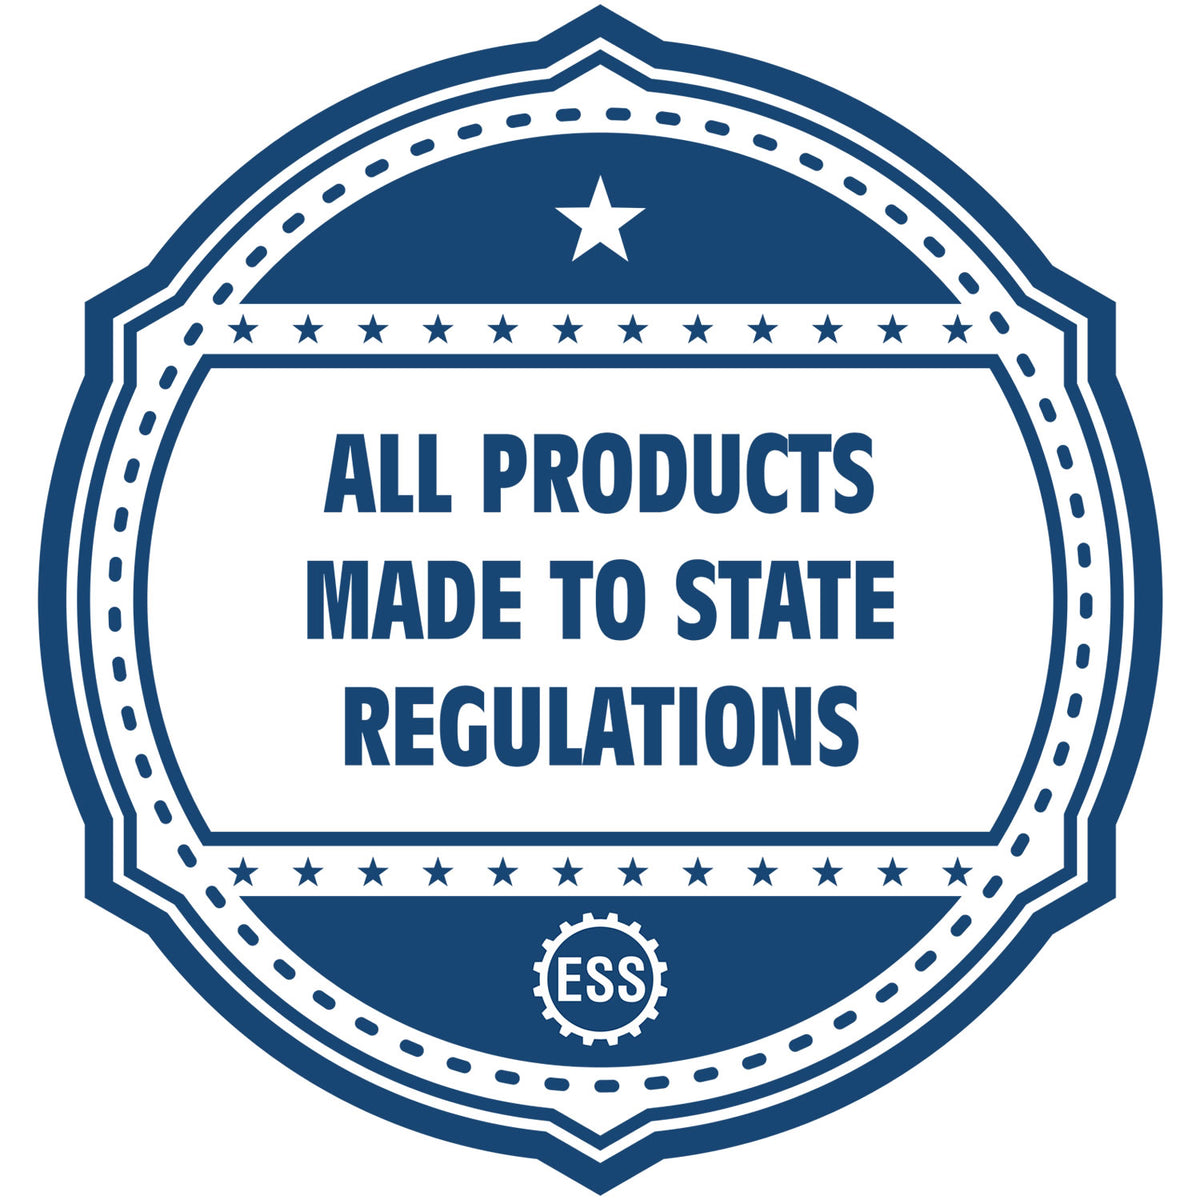 A blue icon or badge for the Gift Oklahoma Architect Seal showing that this product is made in compliance with state regulations.